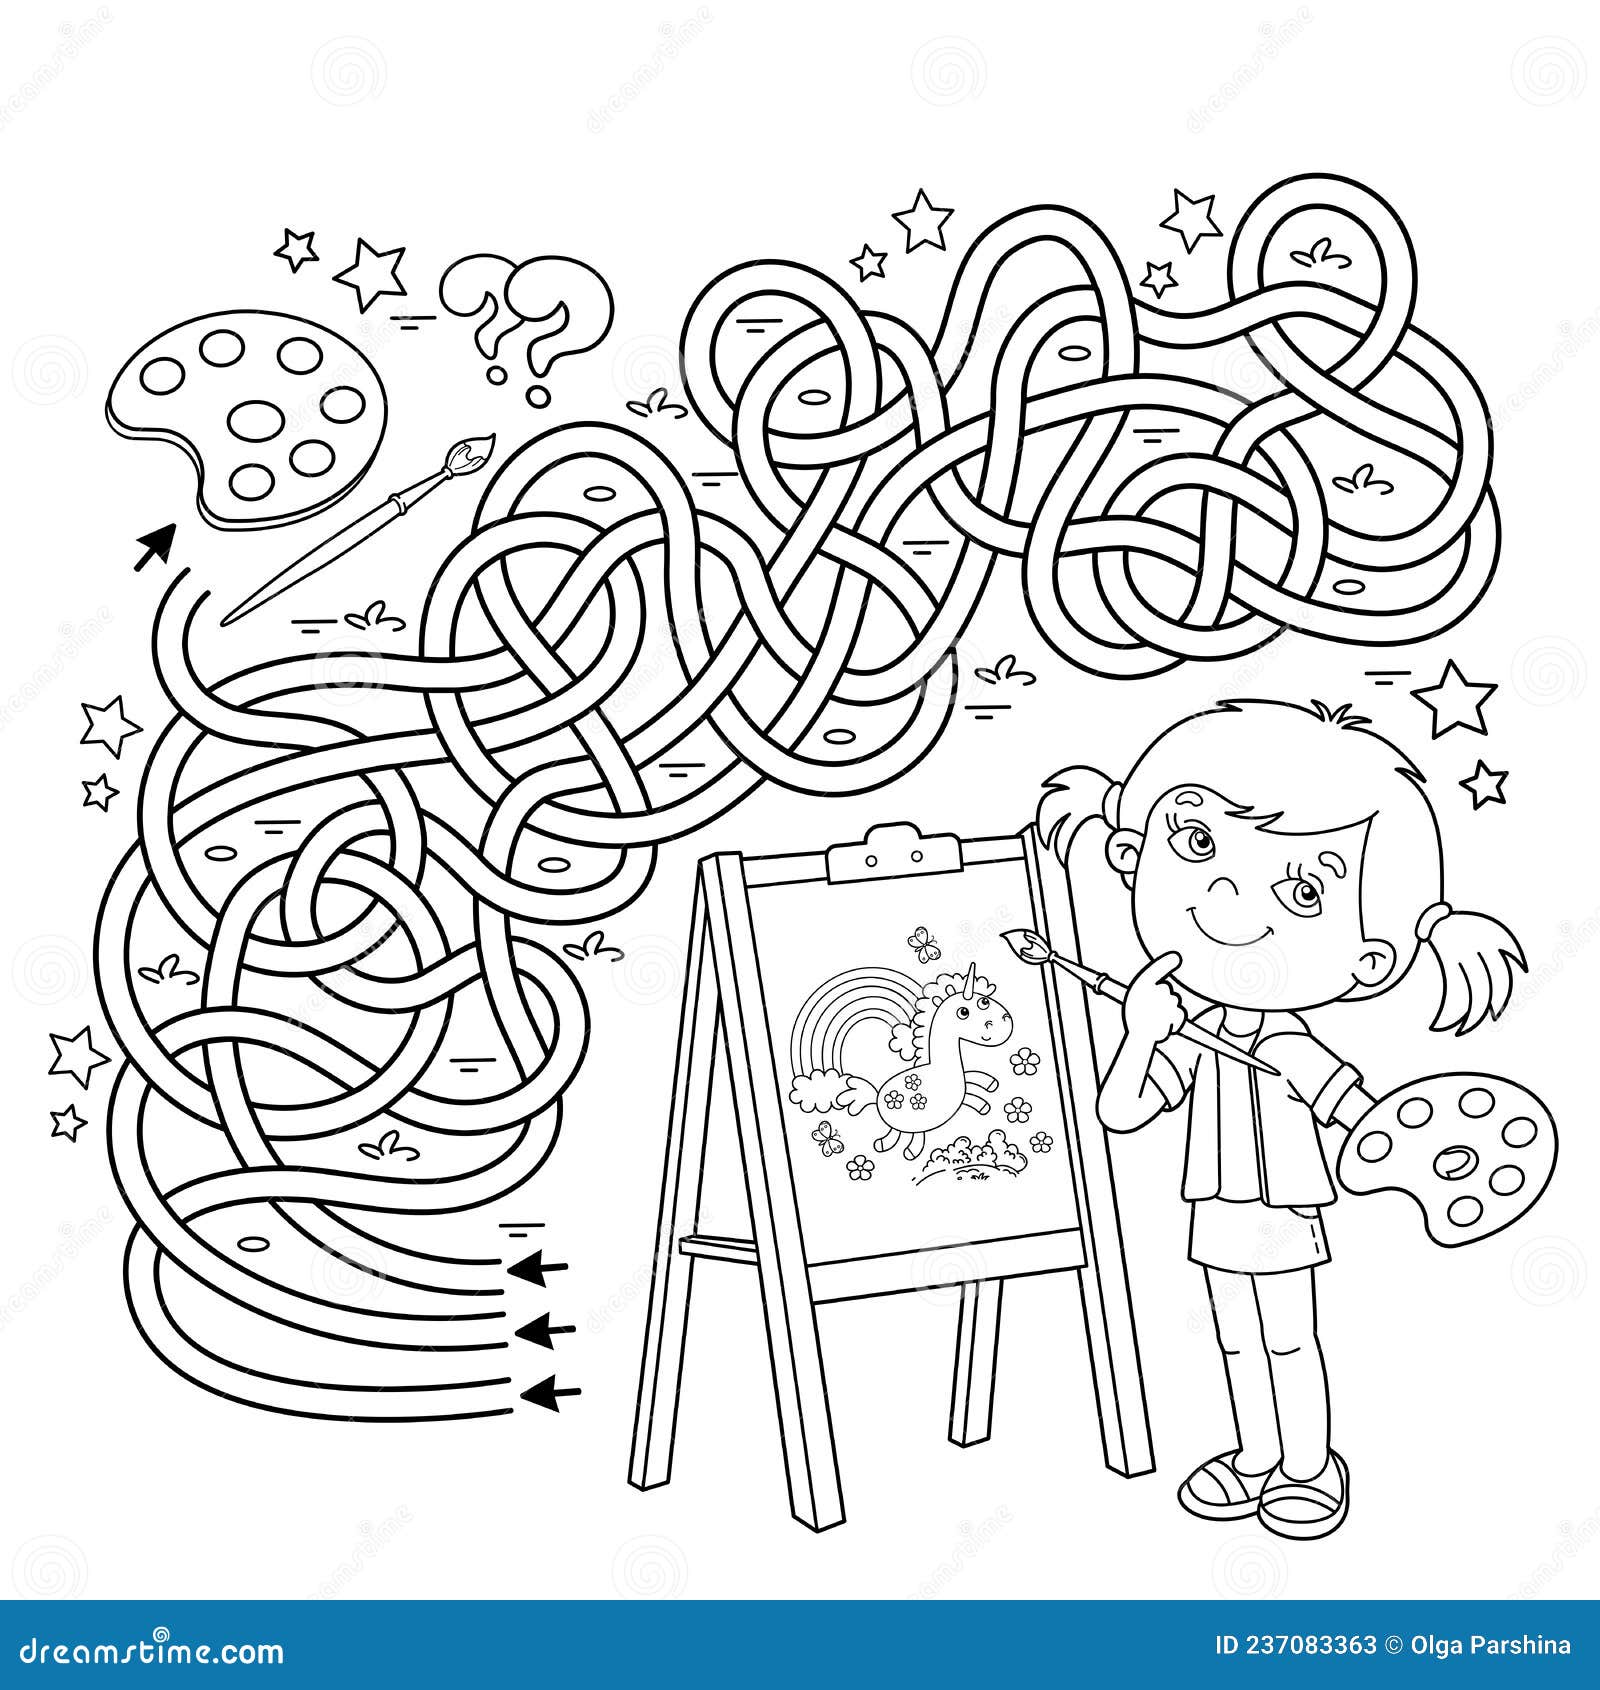 https://thumbs.dreamstime.com/z/maze-labyrinth-game-puzzle-tangled-road-coloring-page-outline-cartoon-girl-brush-paints-little-artist-easel-book-237083363.jpg